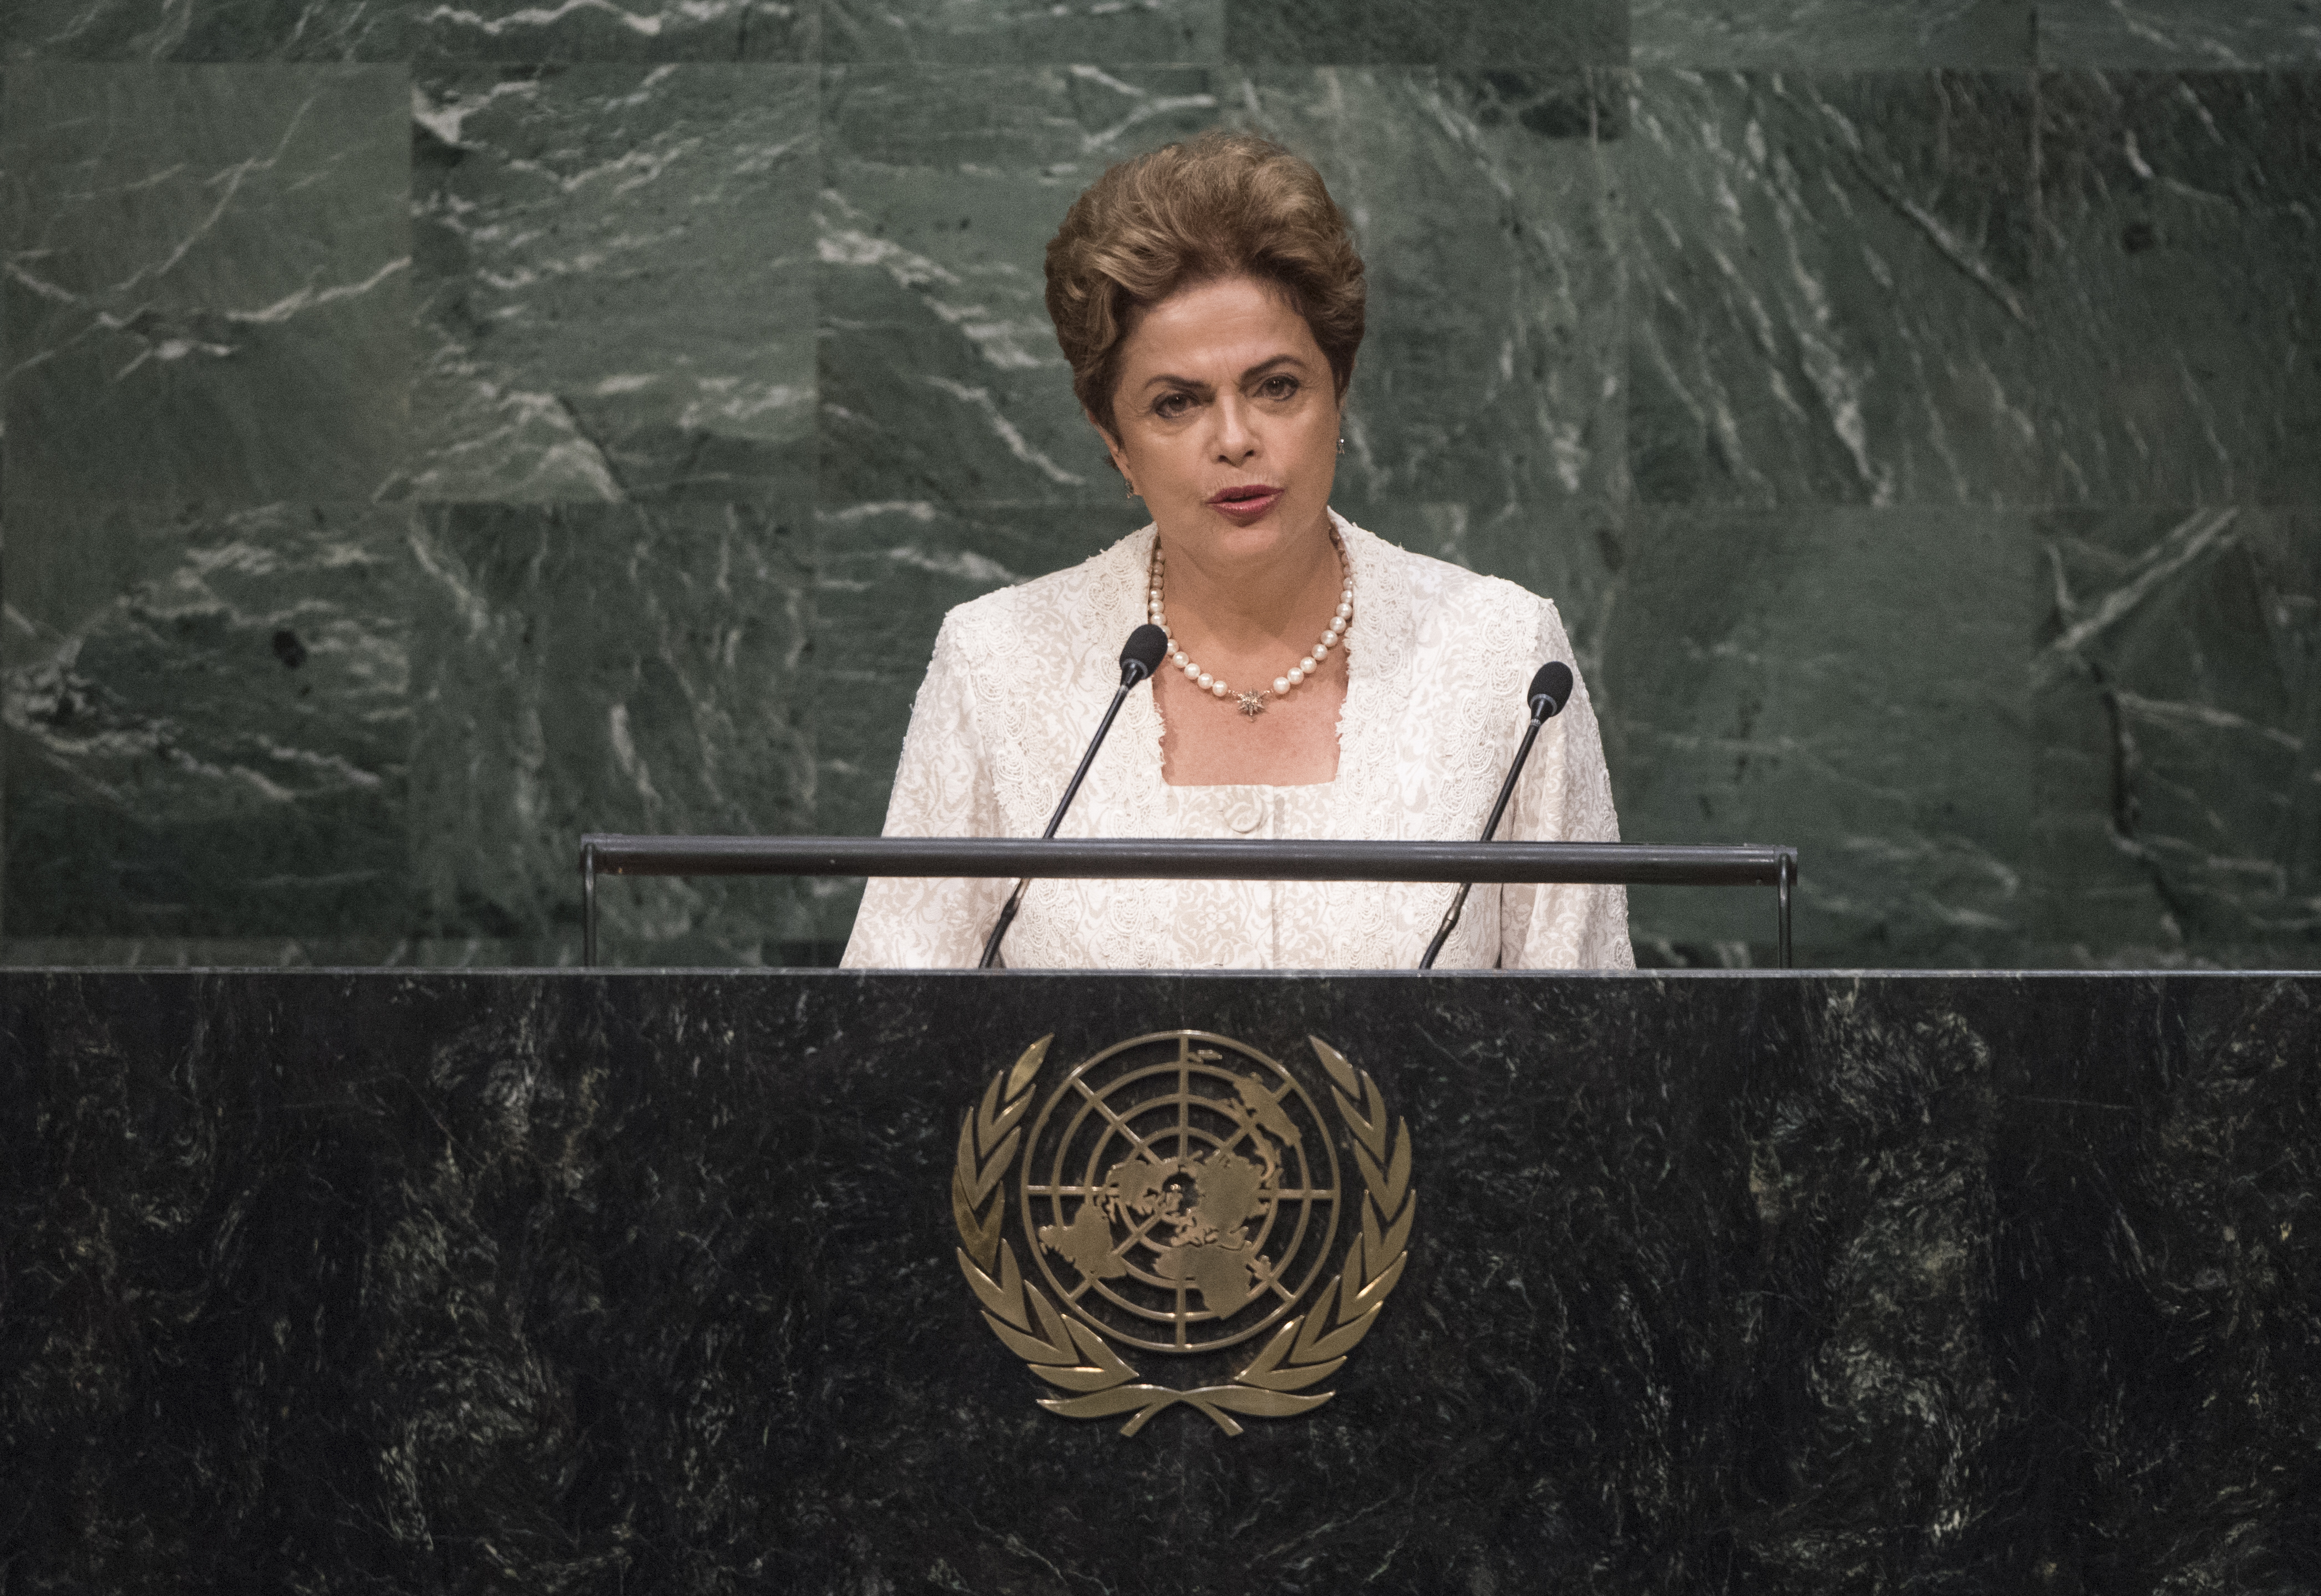 Address by Her Excellency Dilma Rousseff, President of the Federative Republic of BrazilFoto: Cia Pak/ ONU